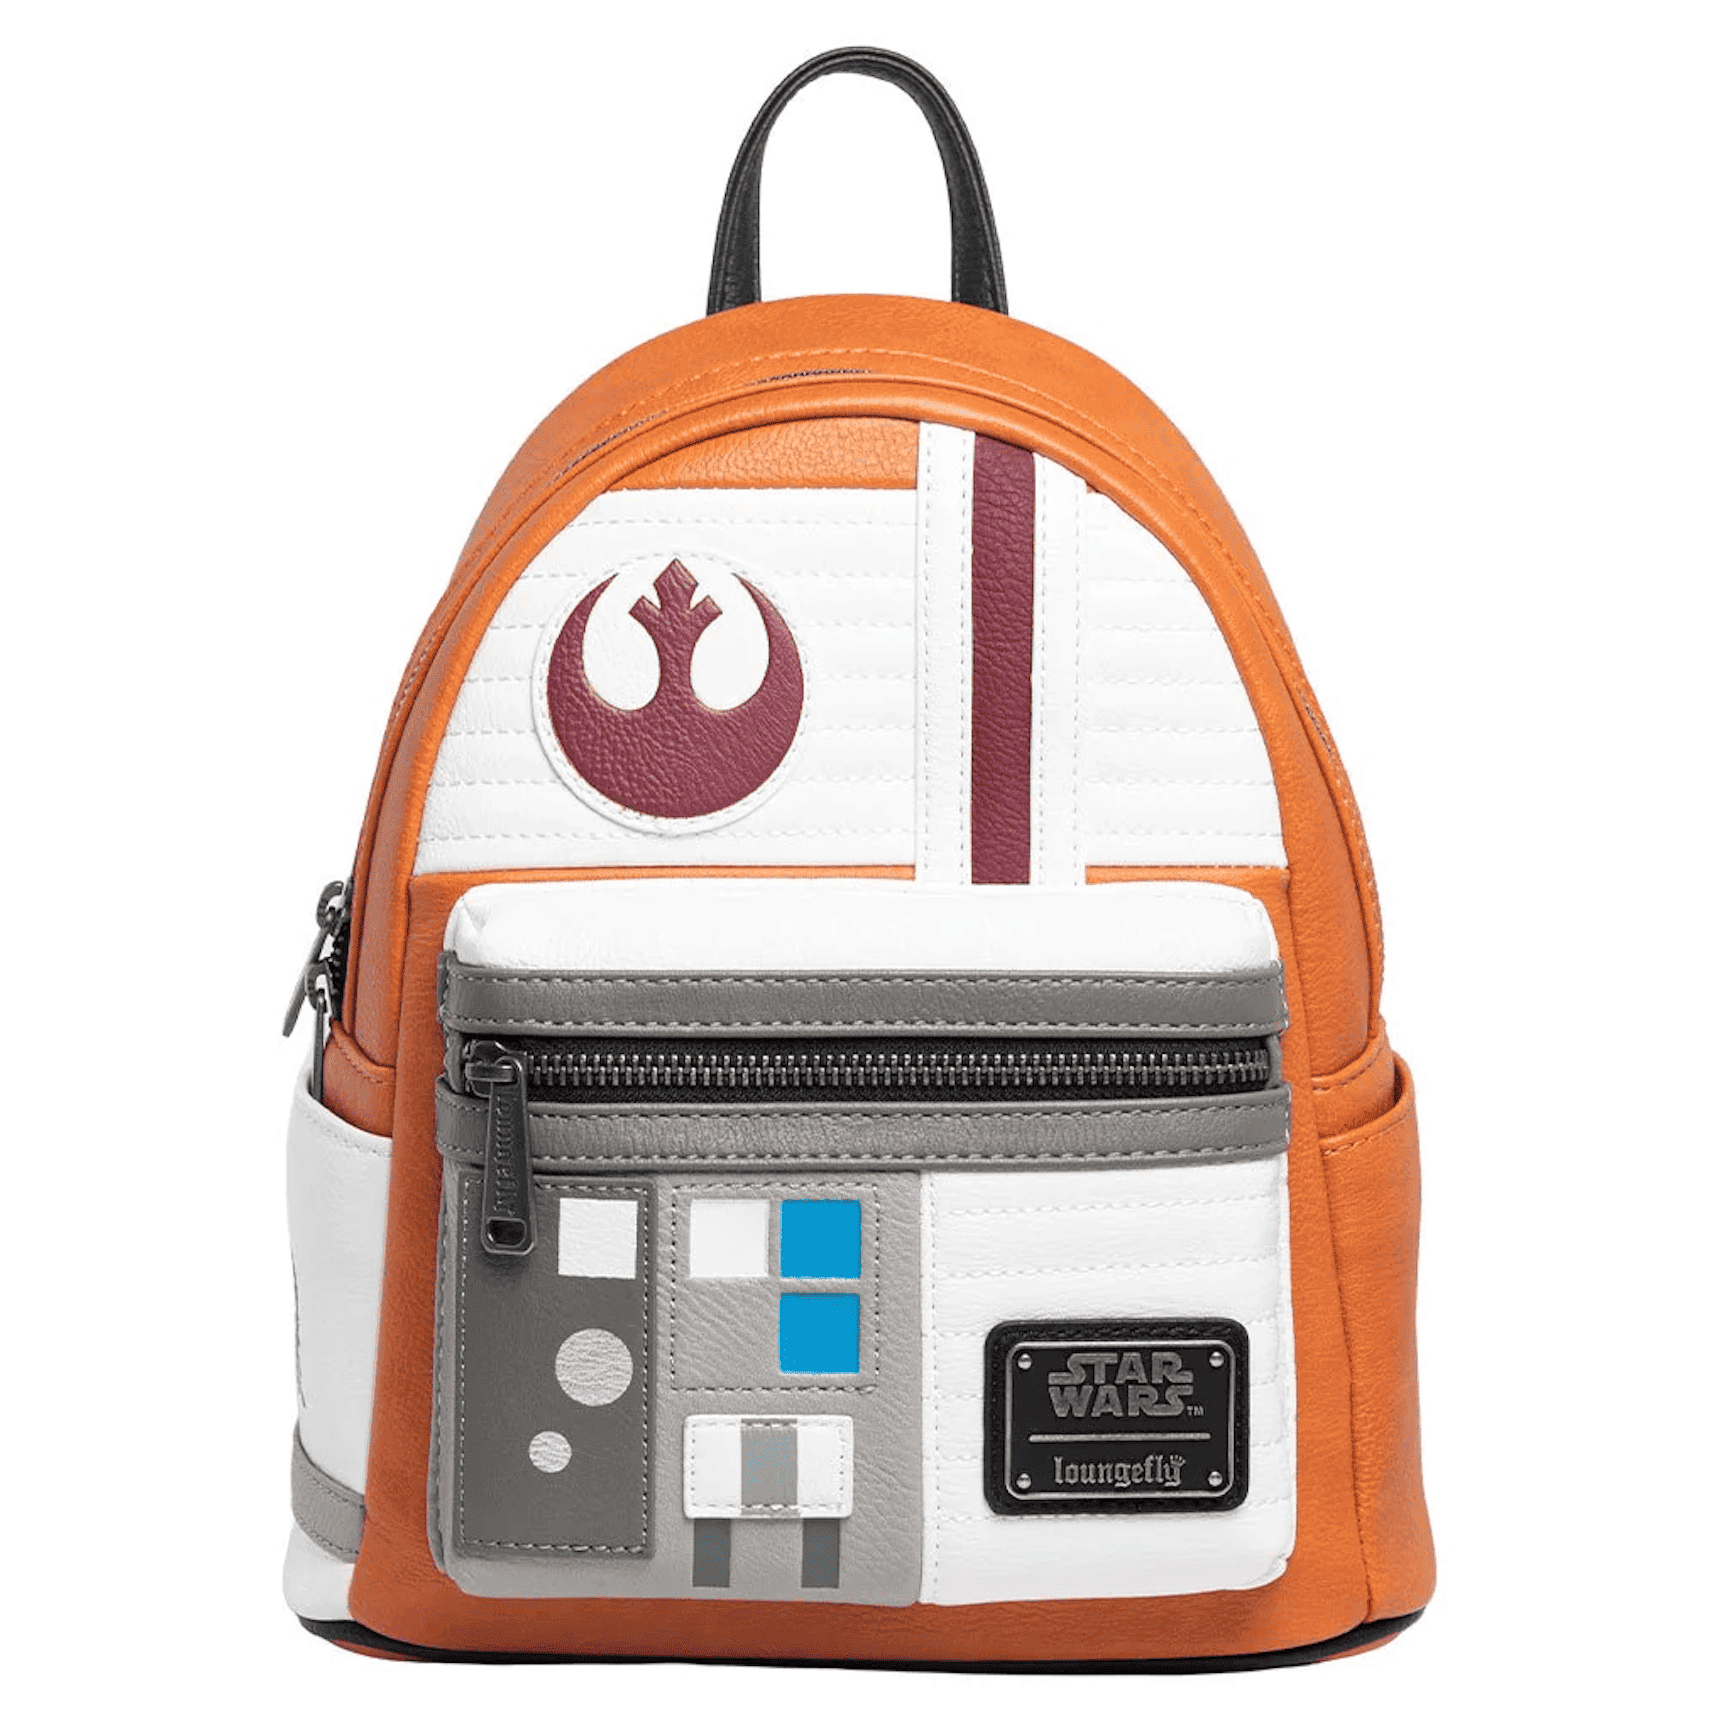 Orange and white mini backpack in the style of the Rebellion pilot uniform